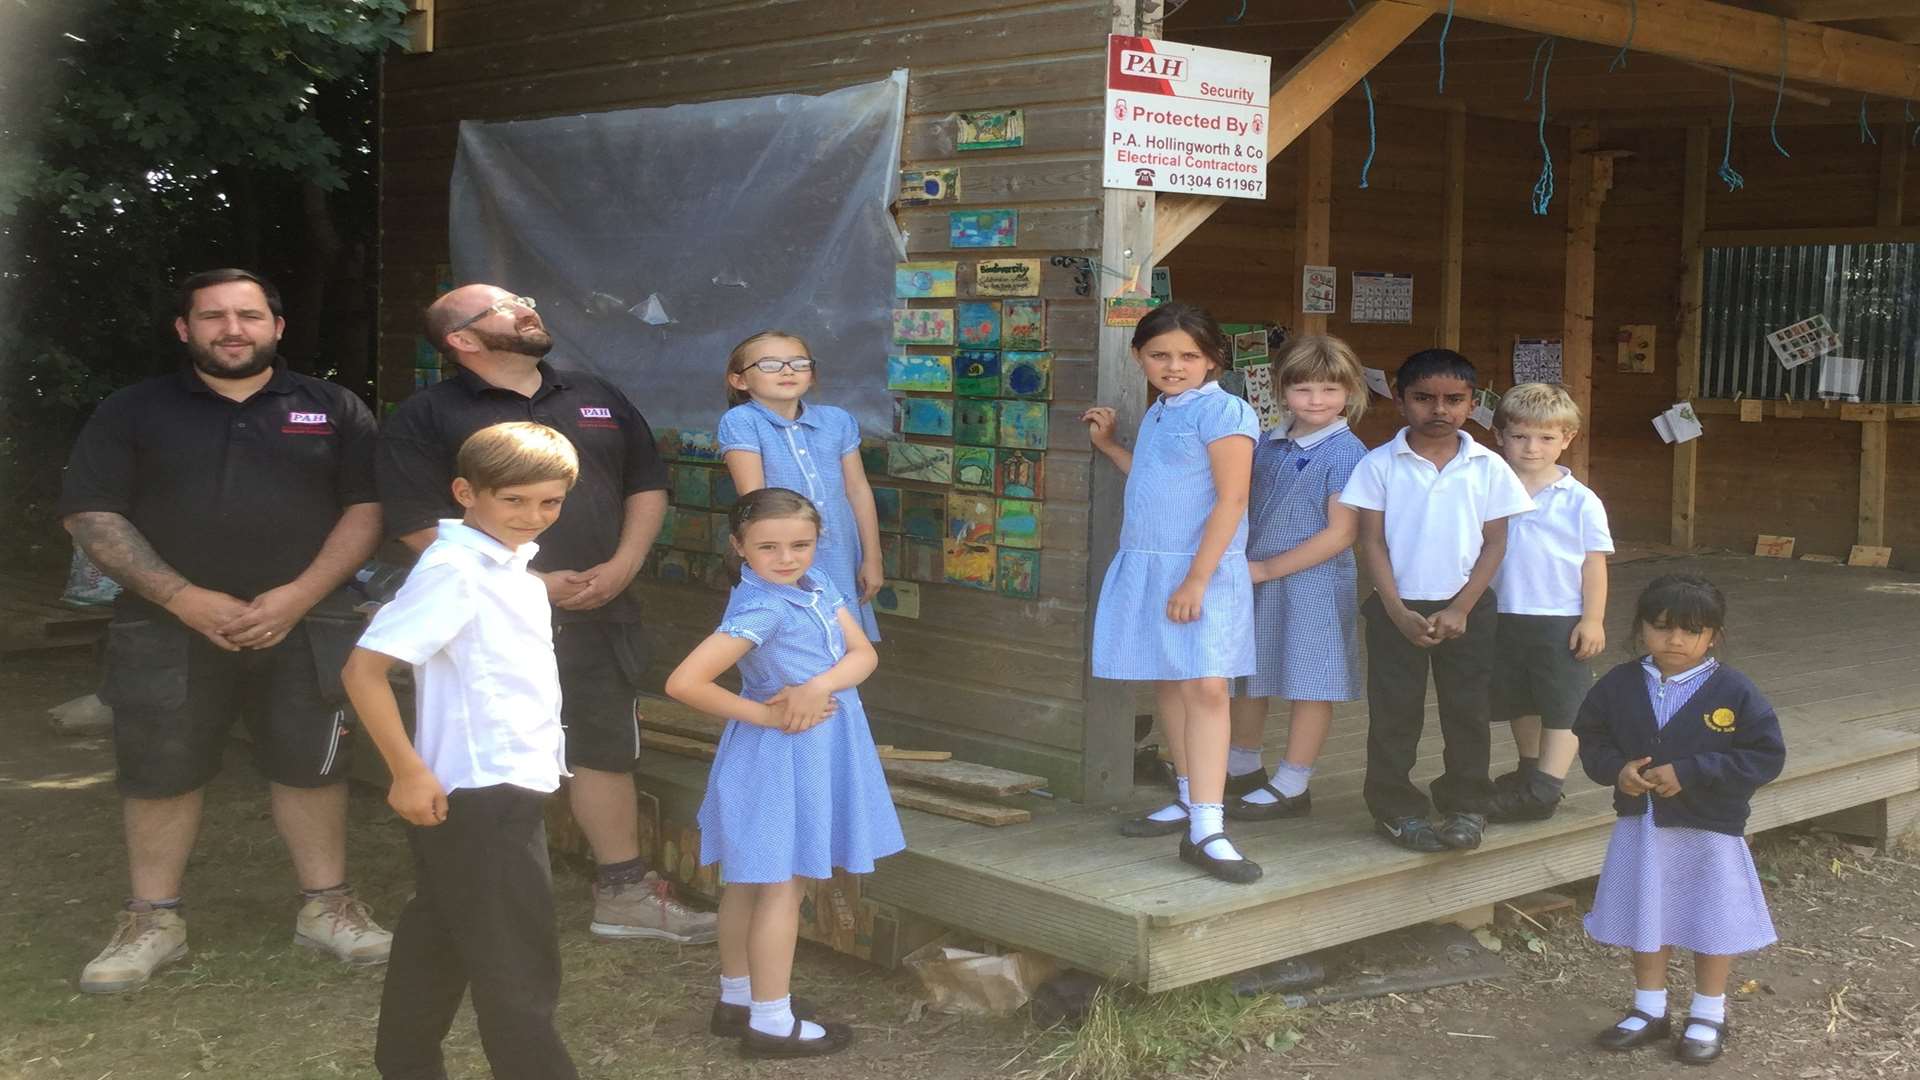 Sandown Primary School's Green Zone is now equipped with cameras thanks to PAH